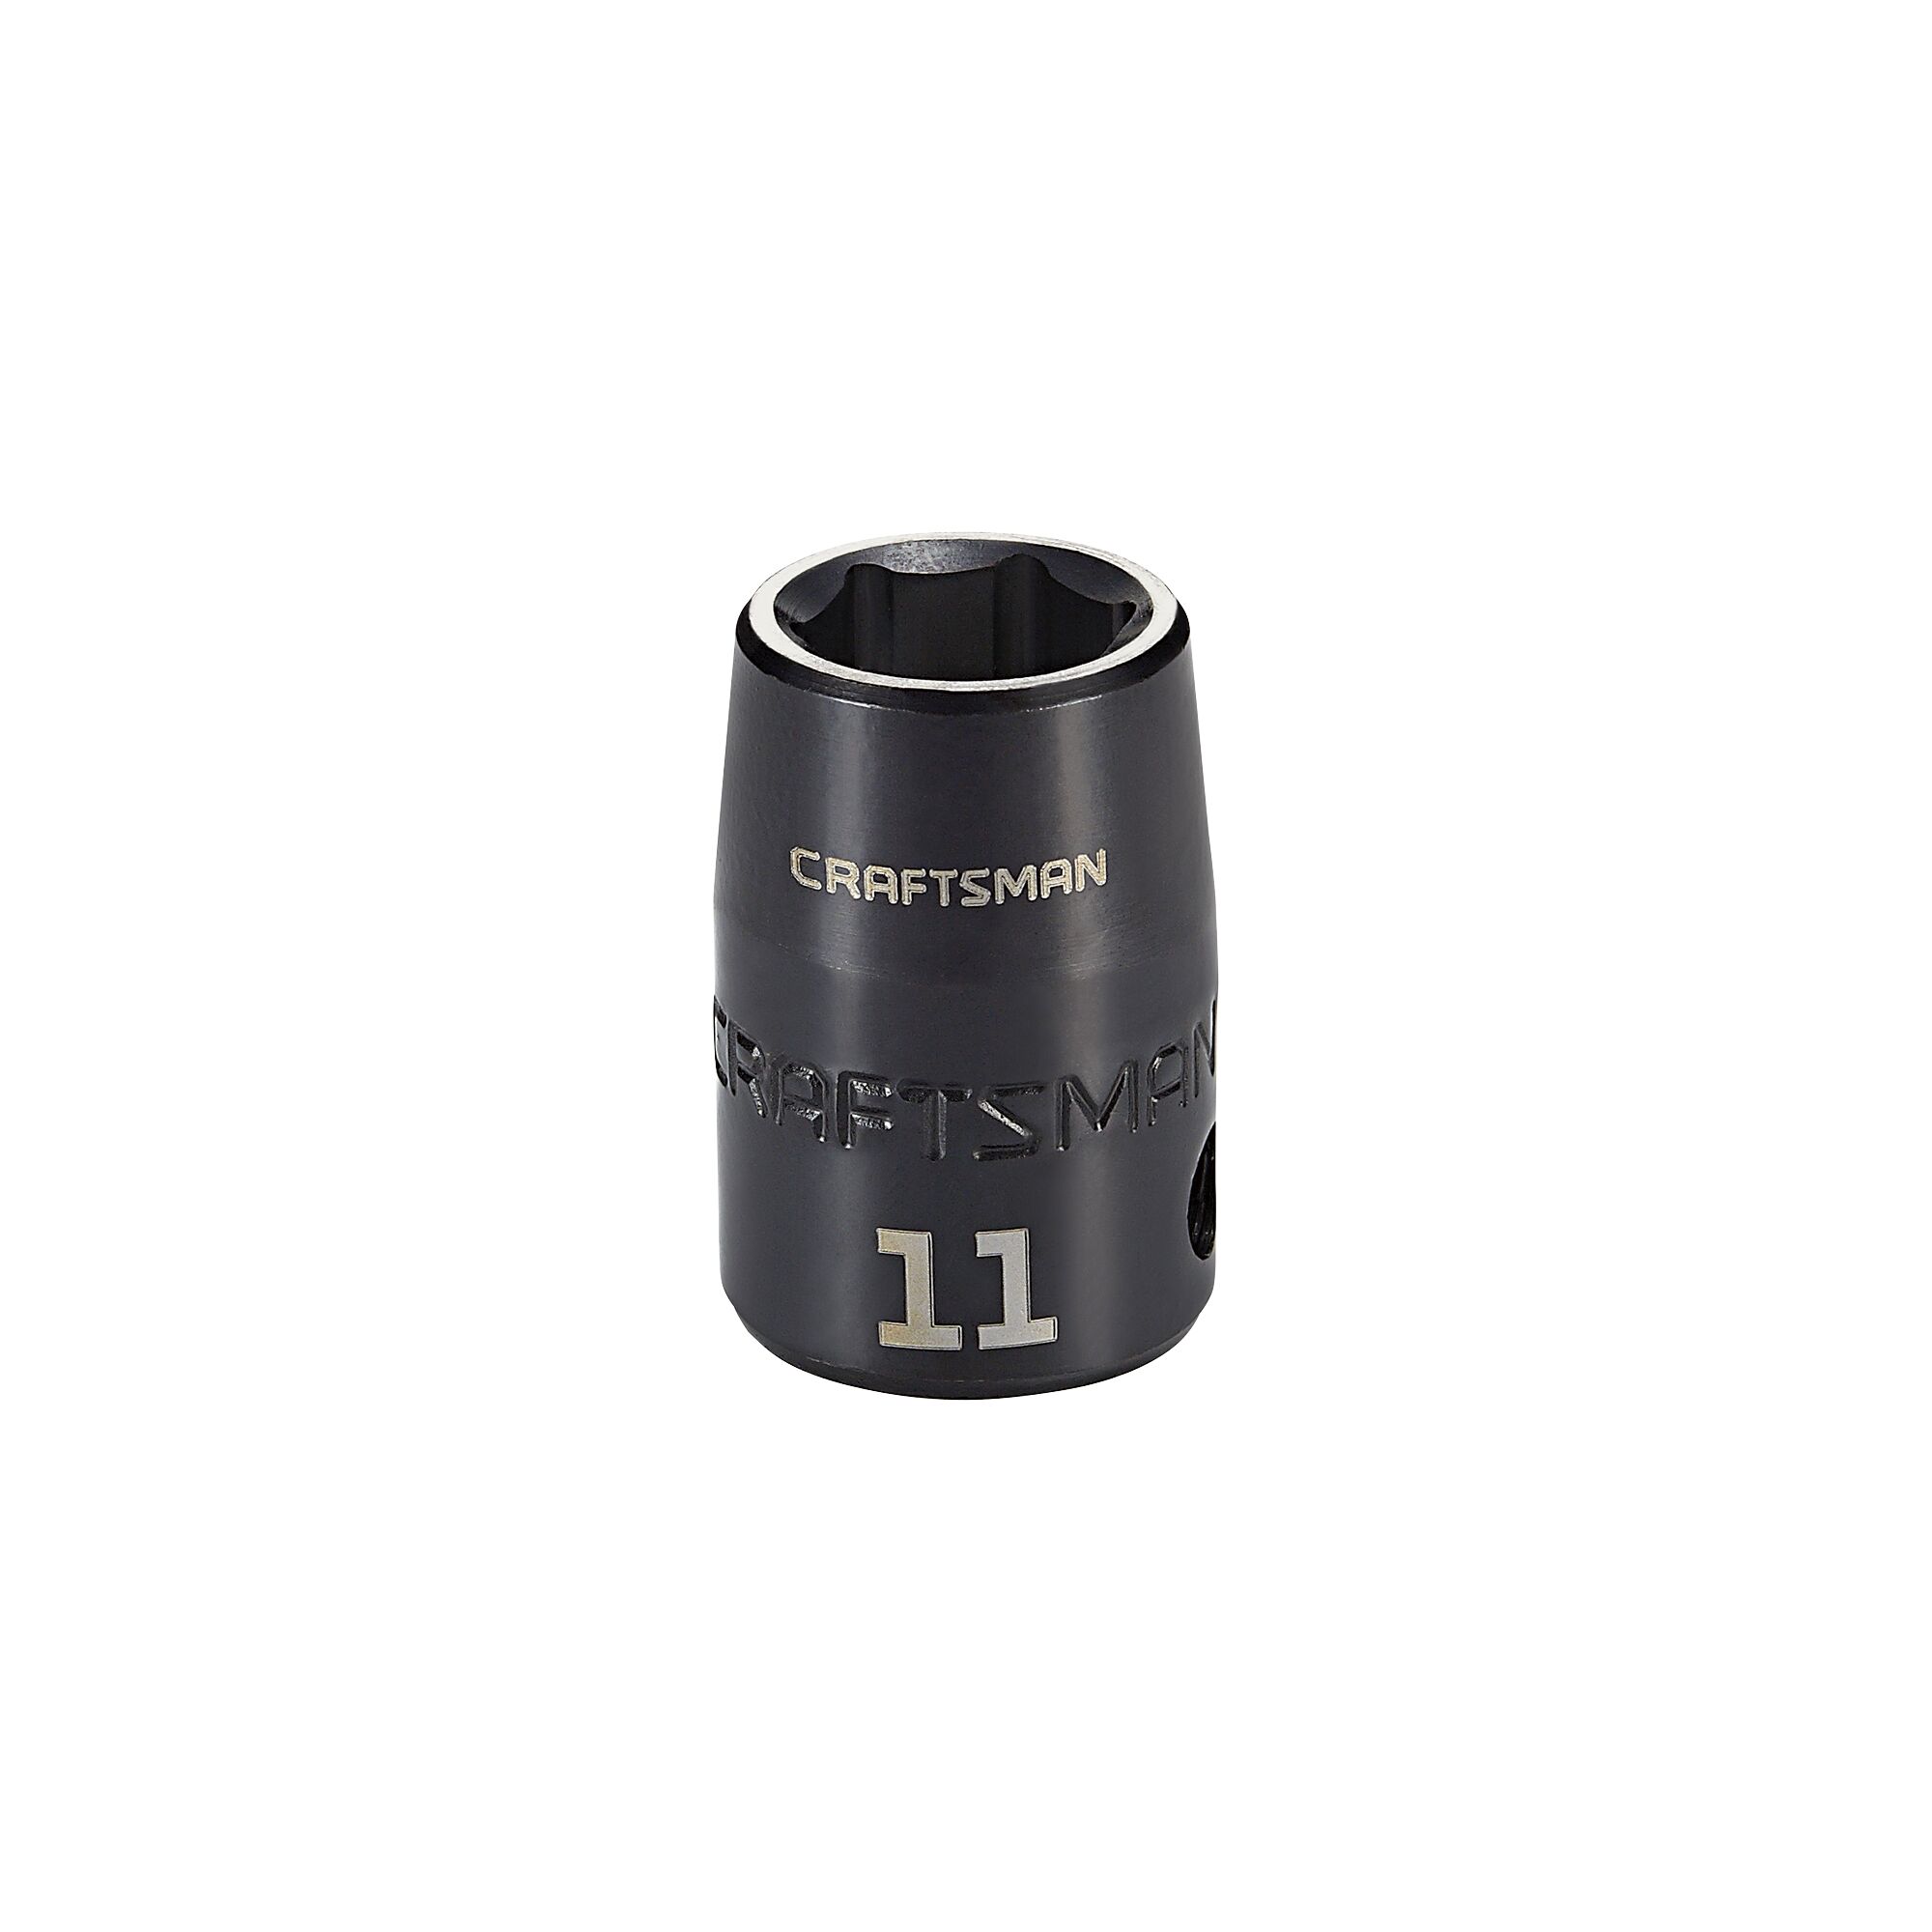 3 eighths inch 11 millimeter metric impact shallow socket.